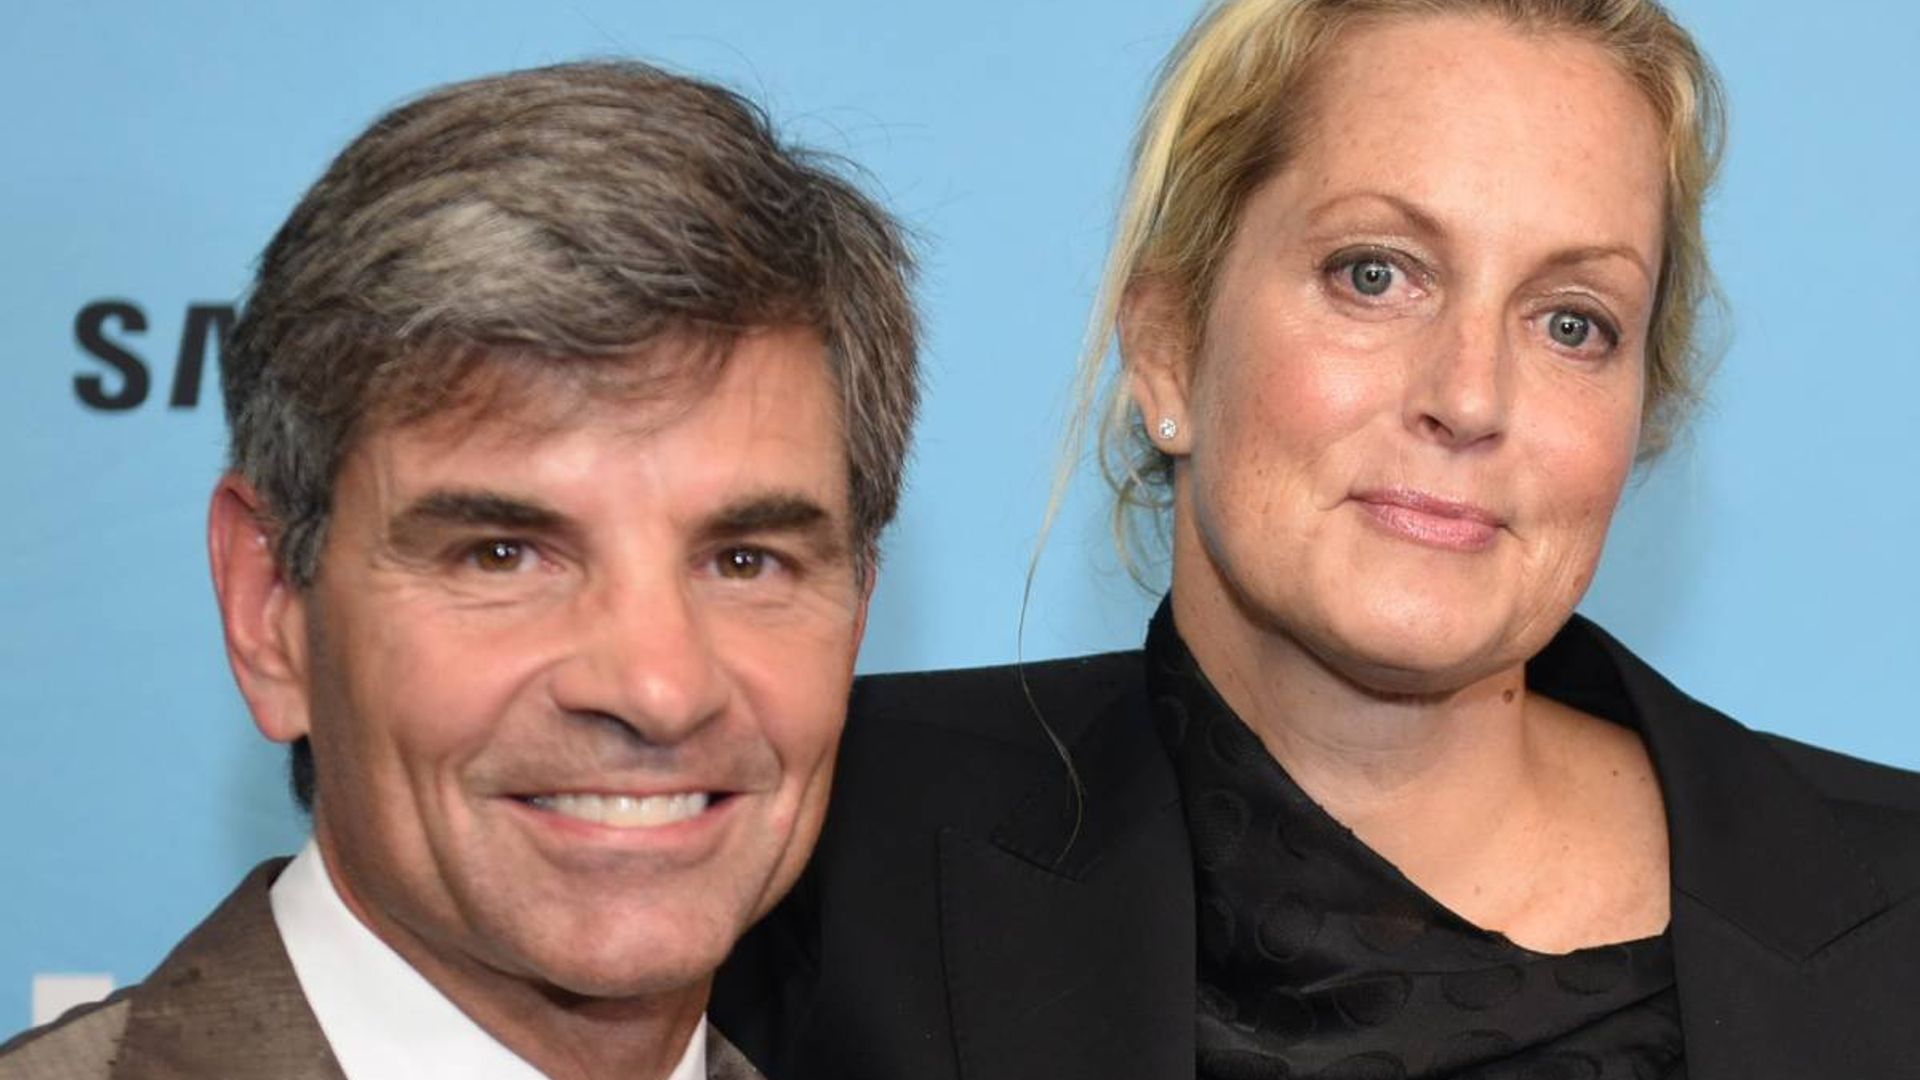 George Stephanopoulos and Ali Wentworth mark bittersweet occasion during date night with a difference